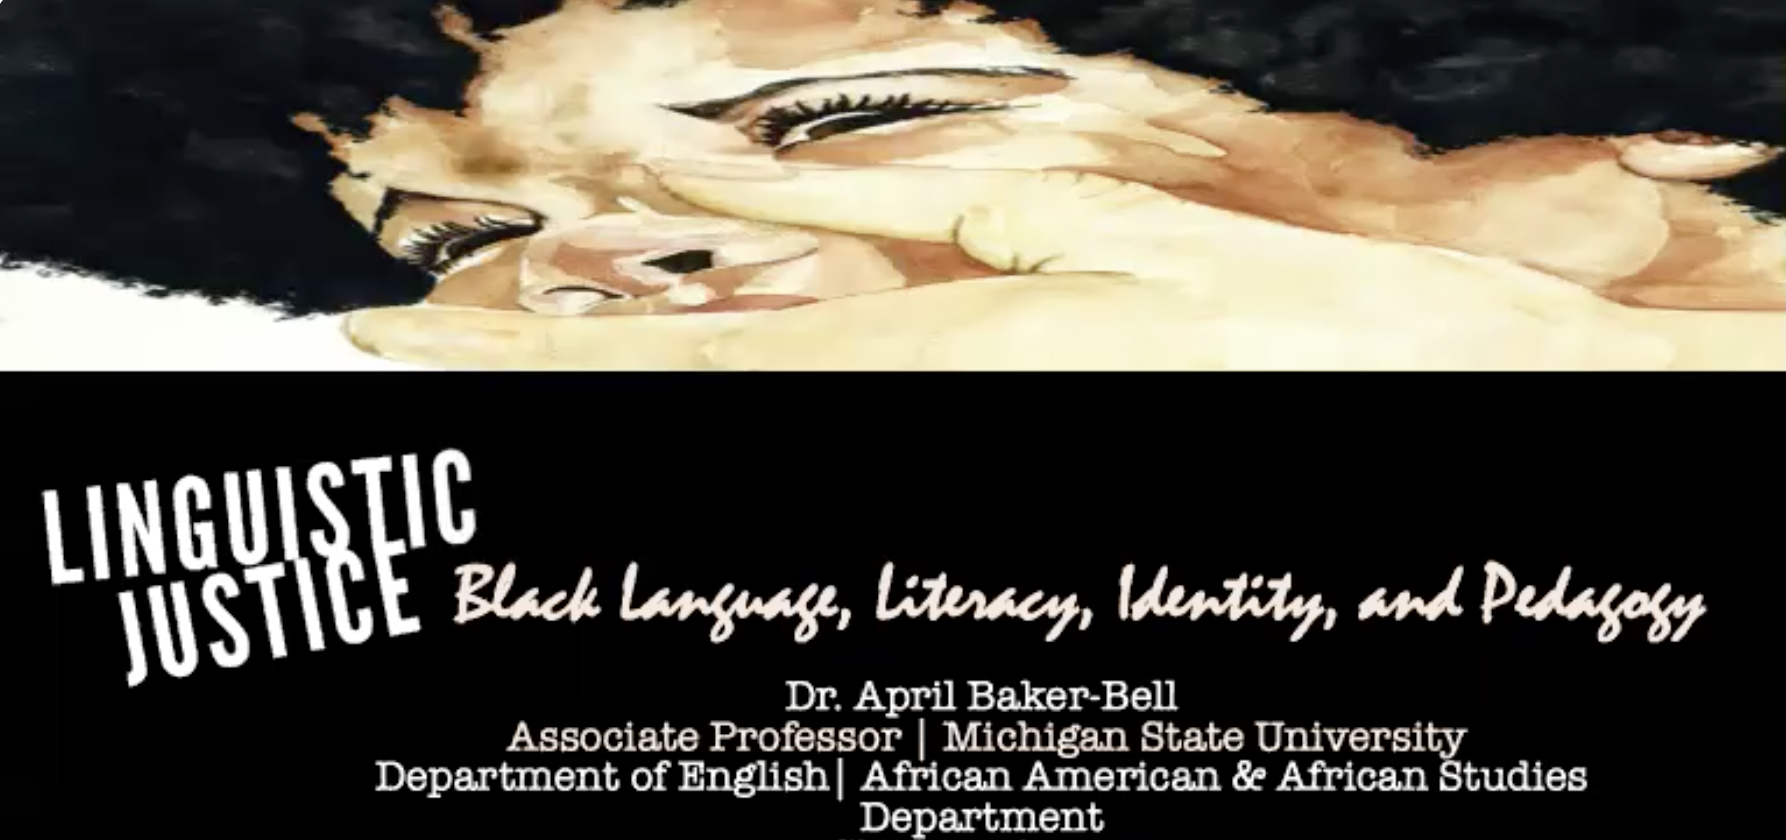 Image: A dark skinned person is in the upper half panel. They have a hand covering their mouth. The bottom half is a black background with white words, reading Linguistic Justice: Black Language, Literacy, Identity, and Pedagogy, Dr. April Baker-Bell, Associate Professor, Michigan State University, Department of English, African American and African Studies Department